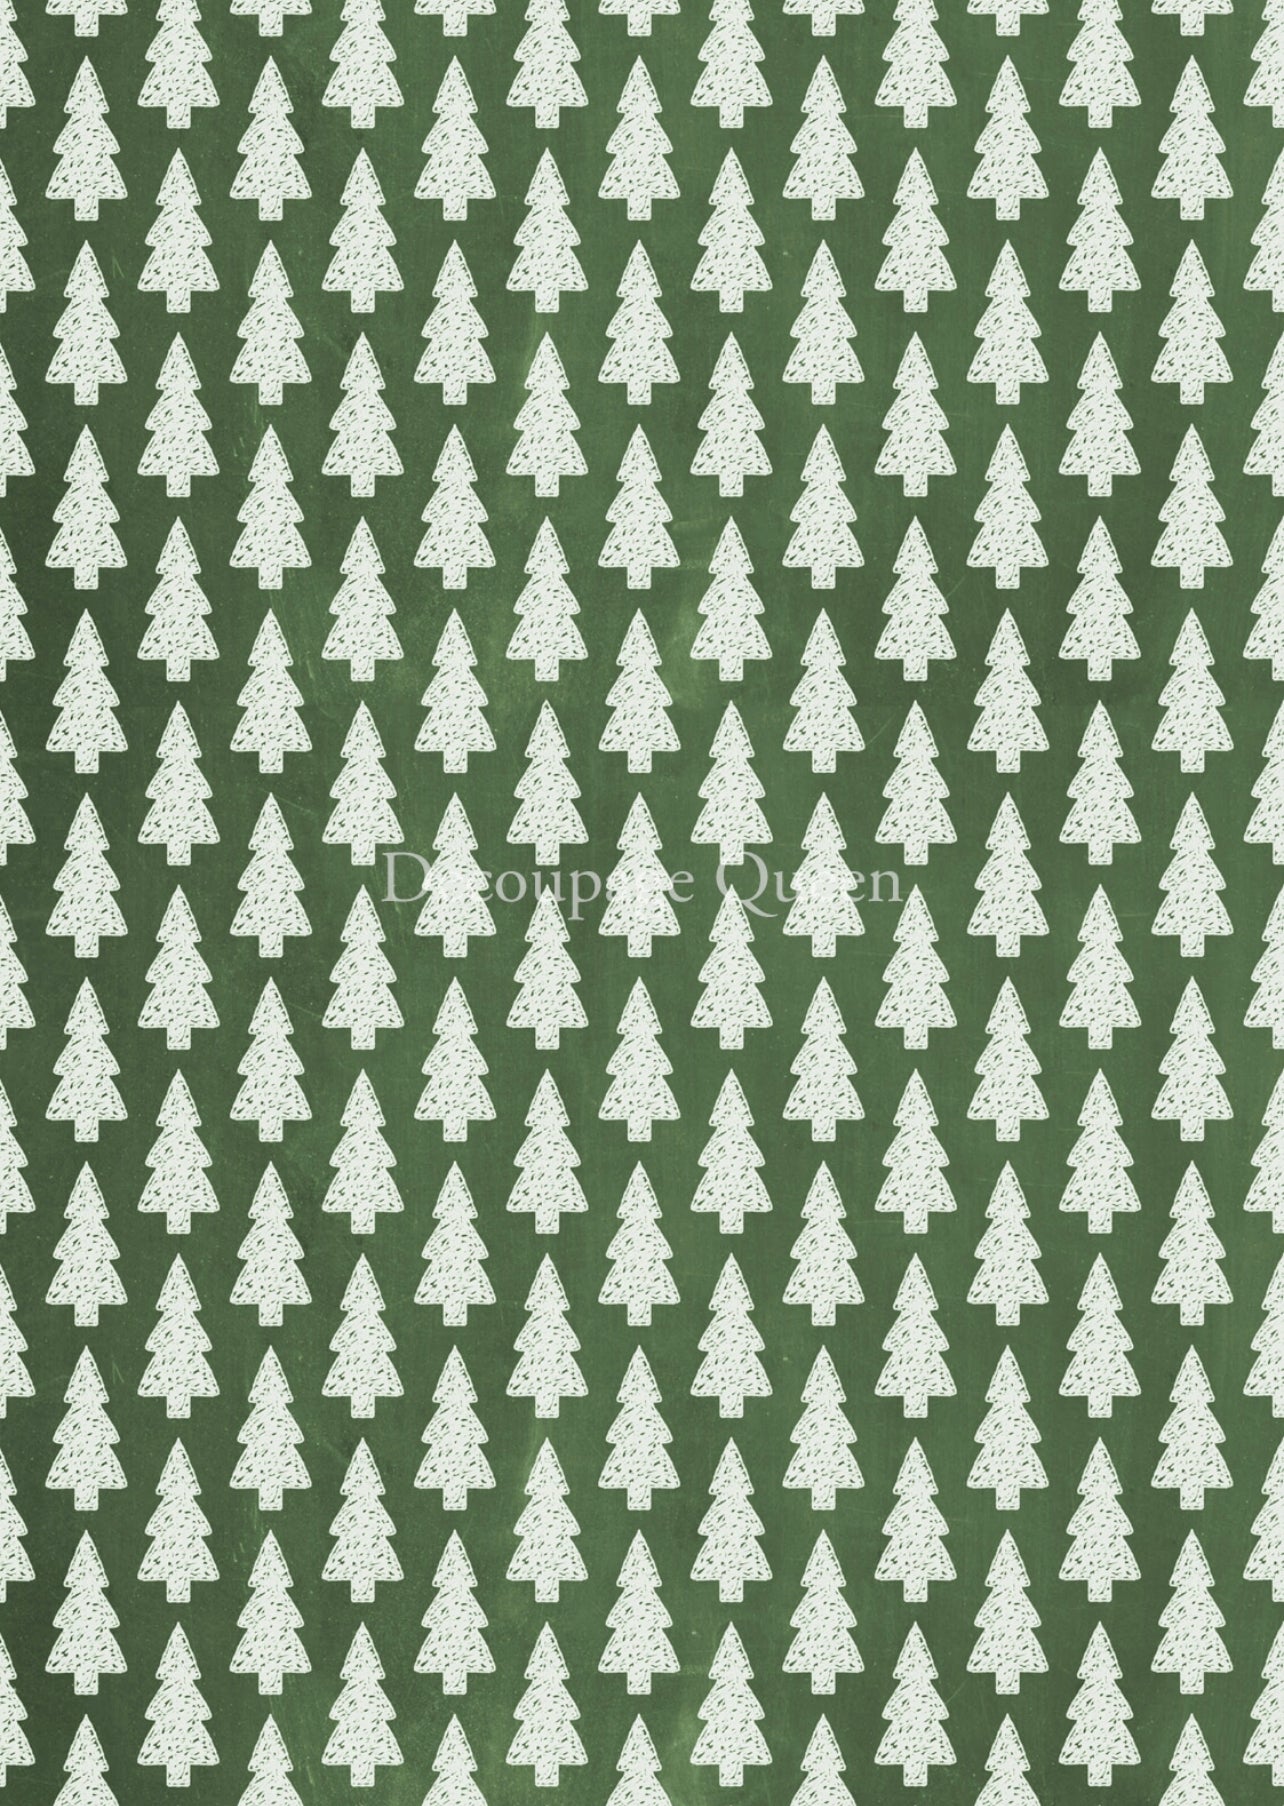 Patterned Pines